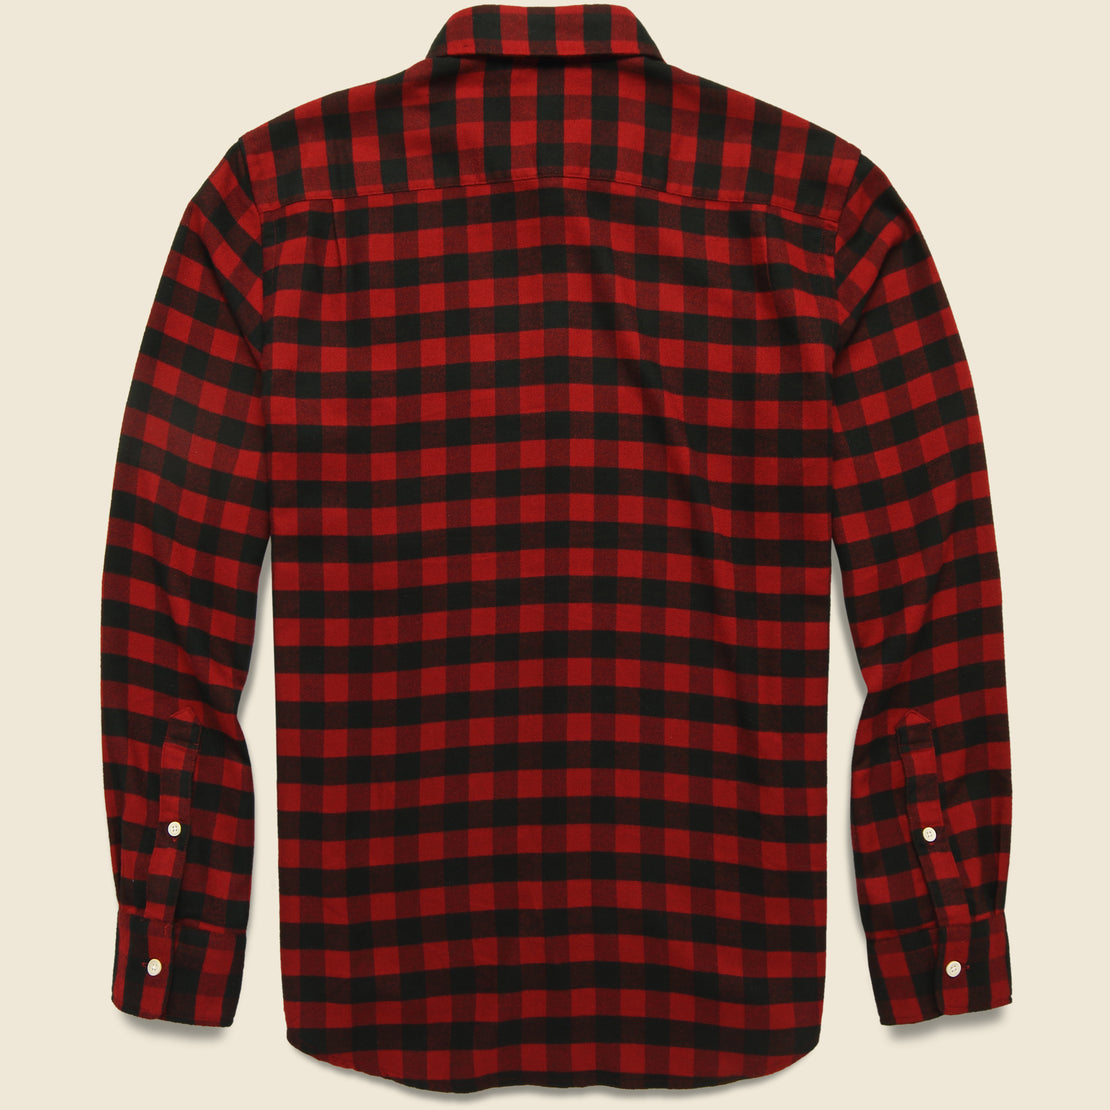 Legend Woven Shirt - Red Tahoe Check - Faherty - STAG Provisions - Tops - L/S Woven - Plaid